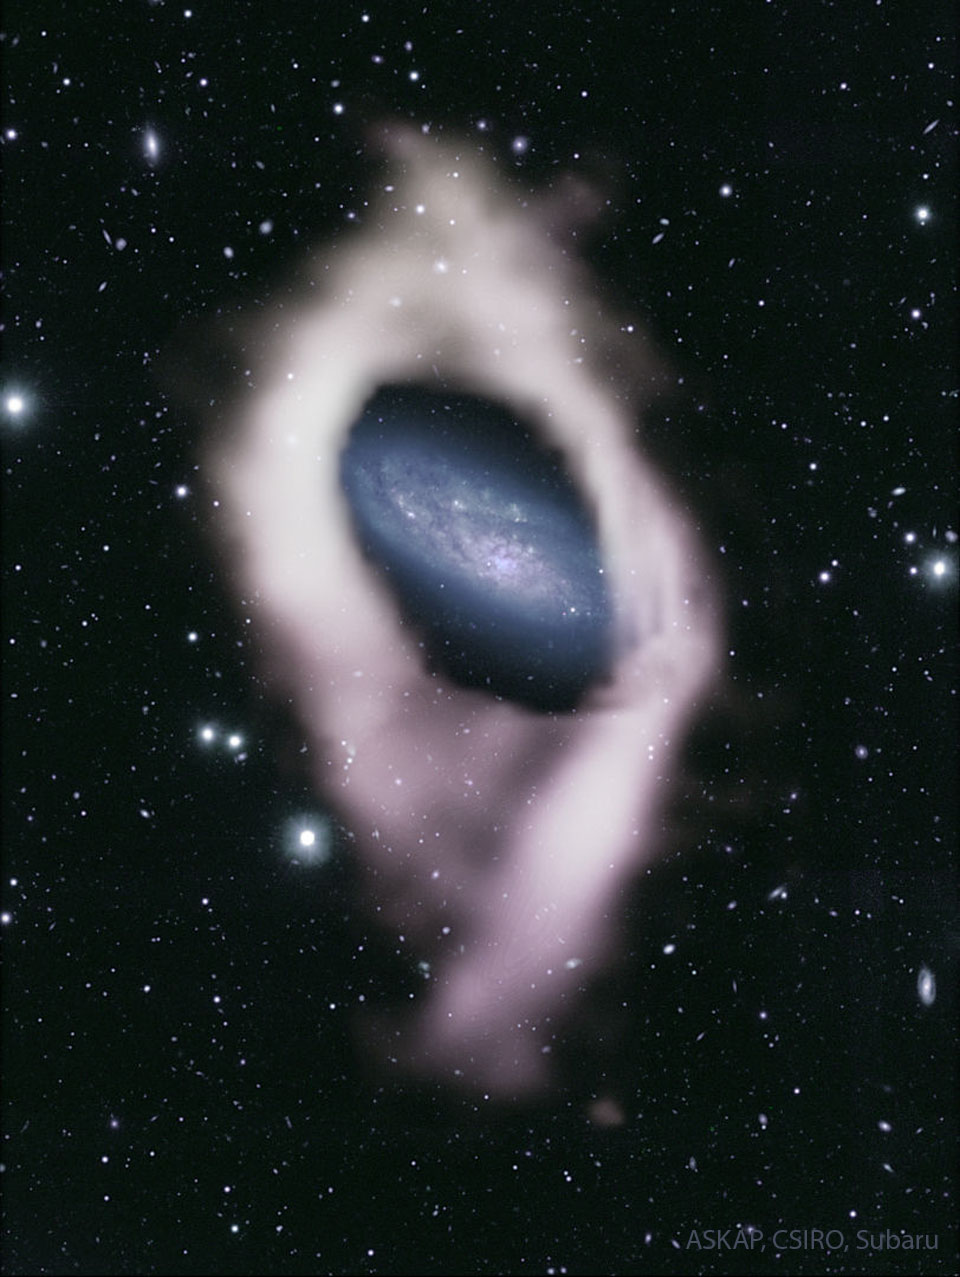 A galaxy with blue spiral arms is seen in the image center  in the midst of numerous foreground stars. This galaxy is surrounded by a white envelope of gas.